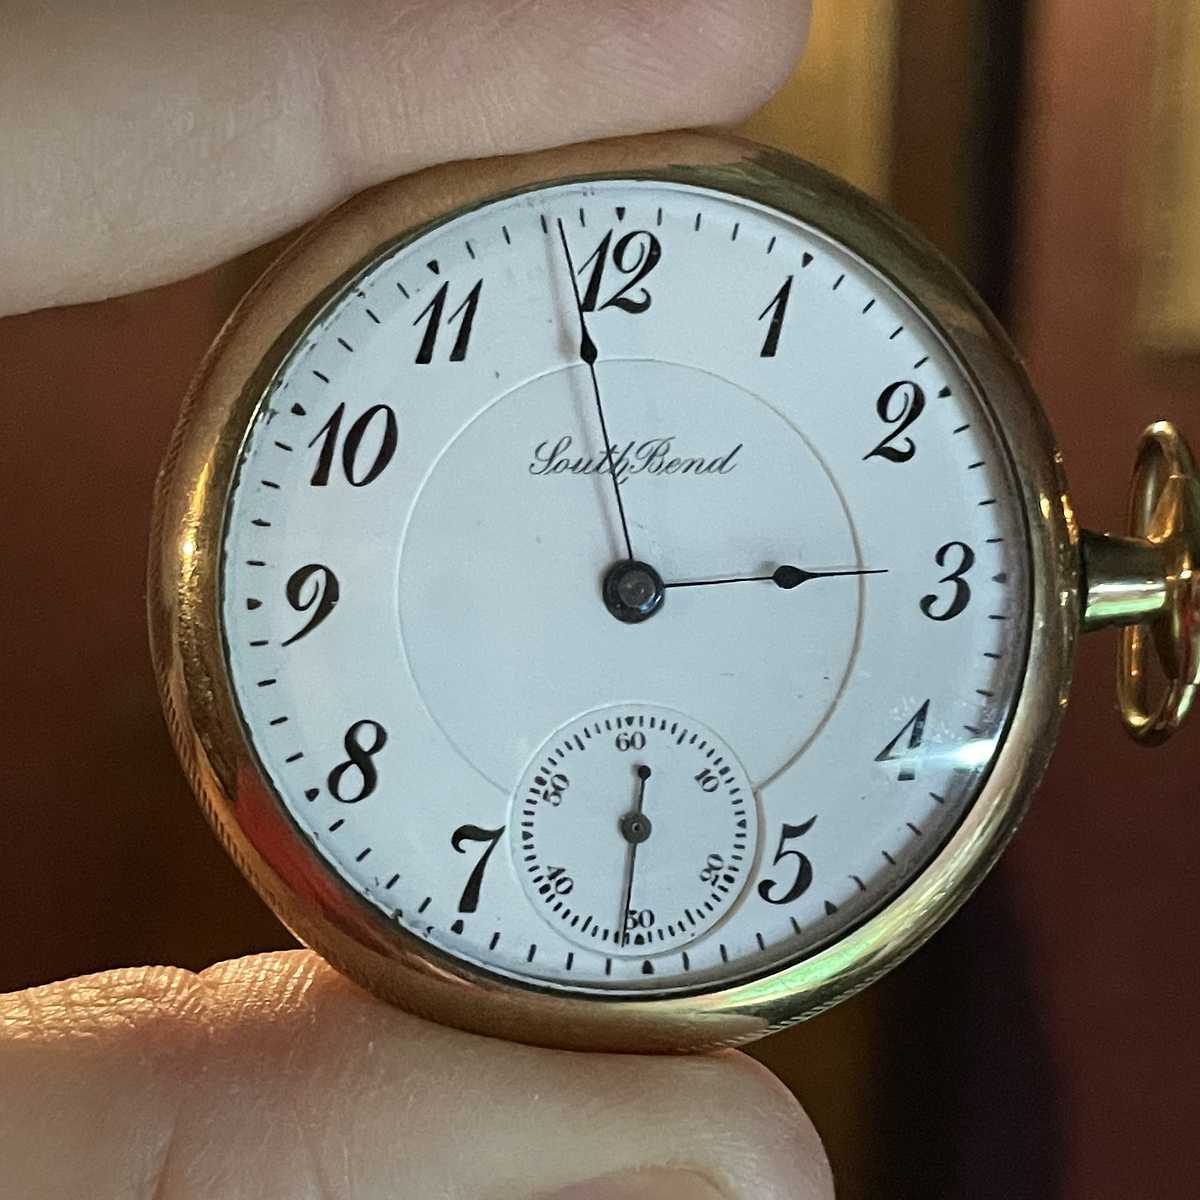 1906 South Bend Watch Grade 290 Front in pocket watch case